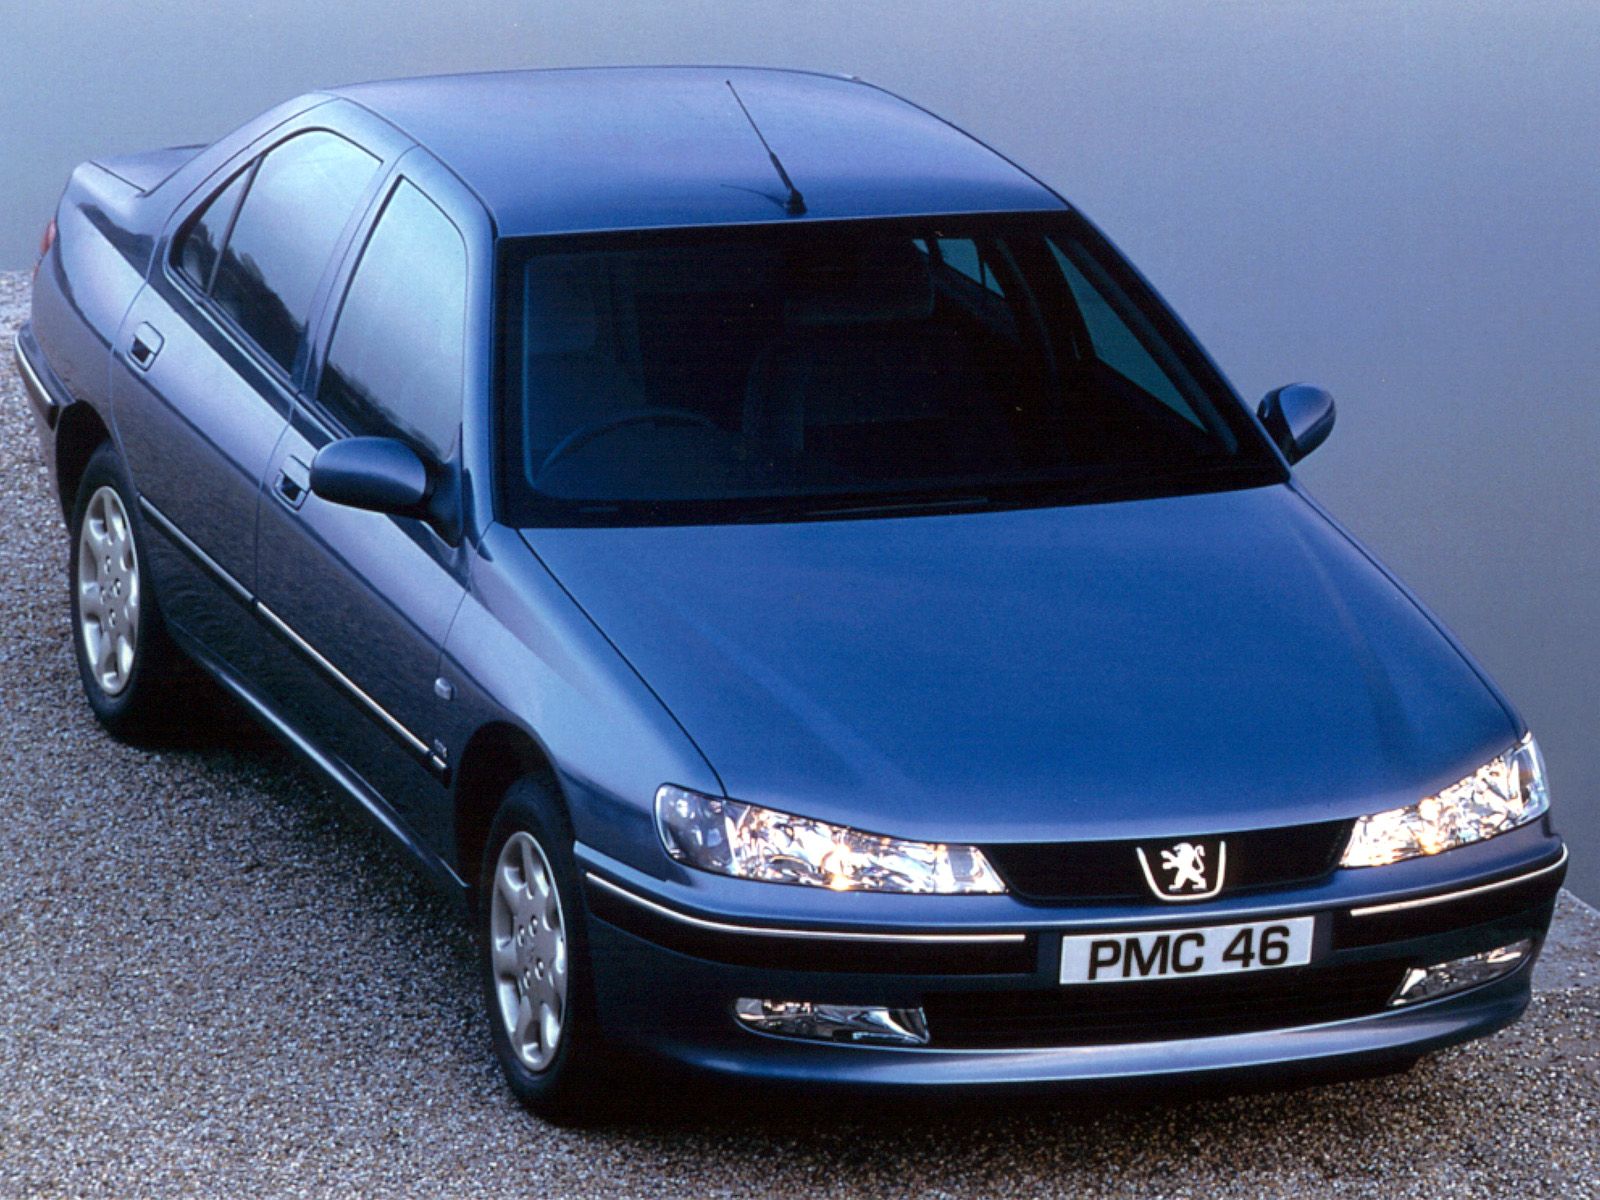 Peugeot 406 picture 2050 Peugeot photo gallery